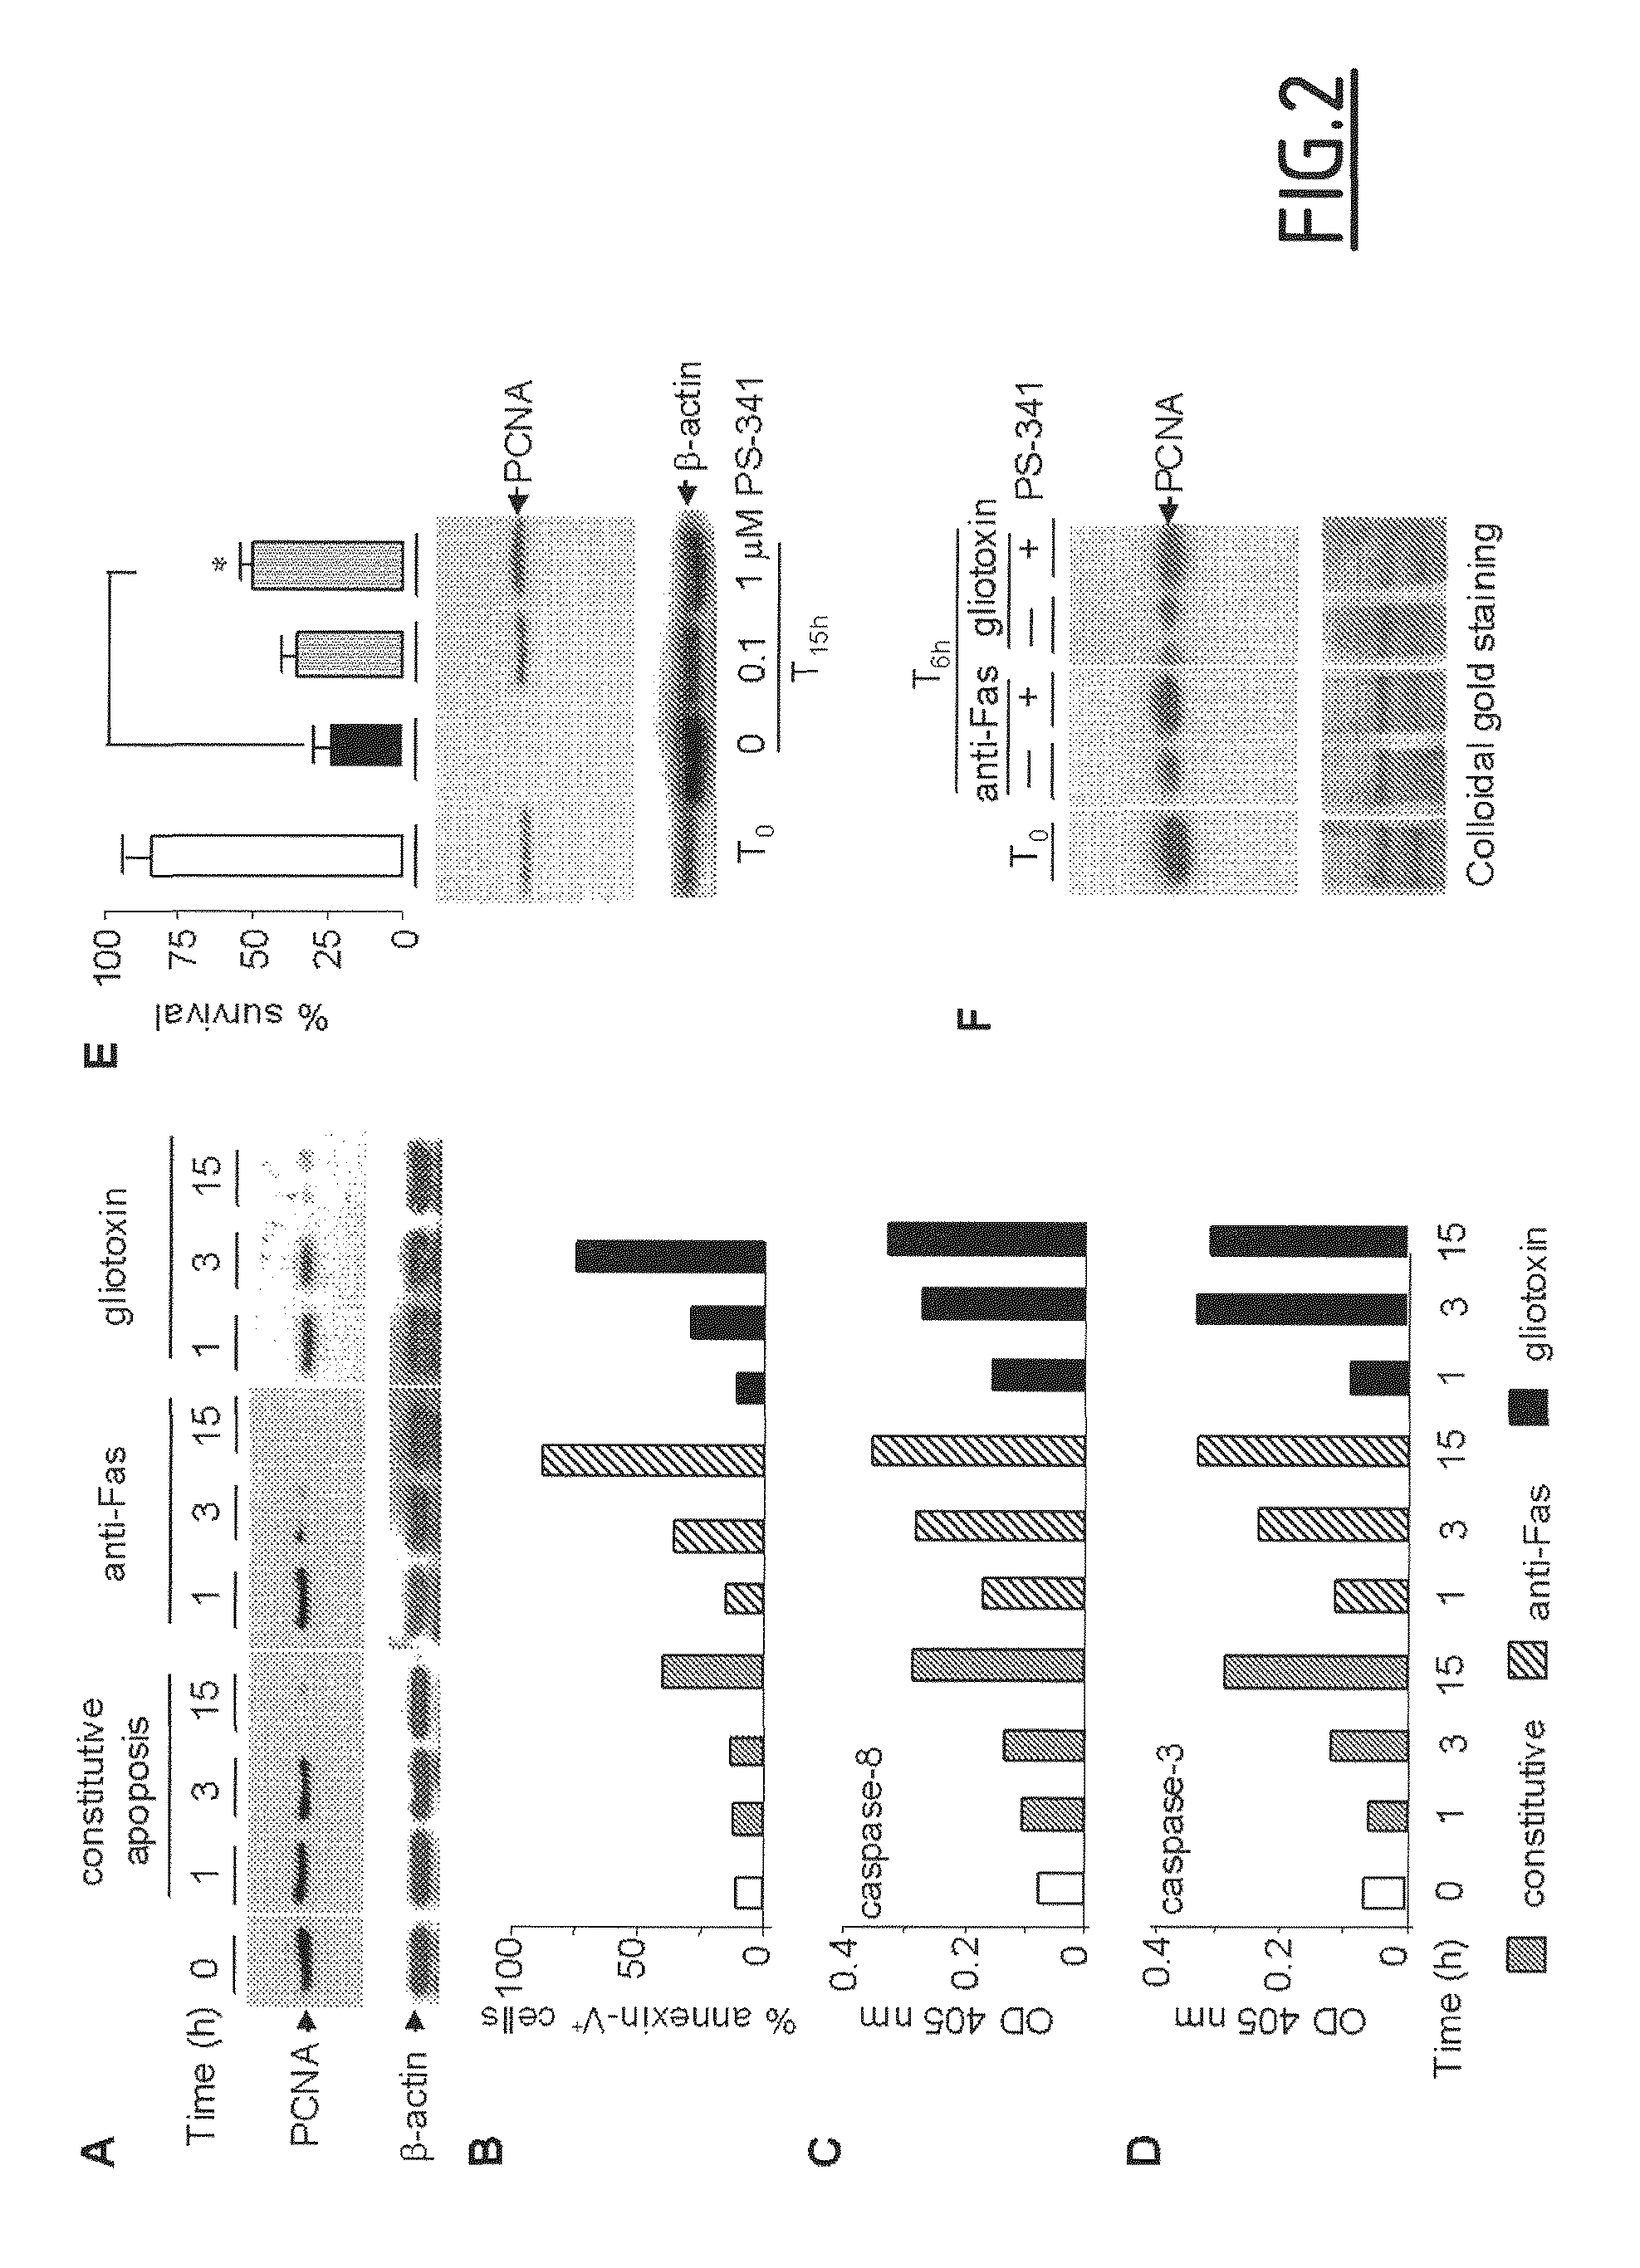 Compounds for the treatment of inflammation and neutropenia